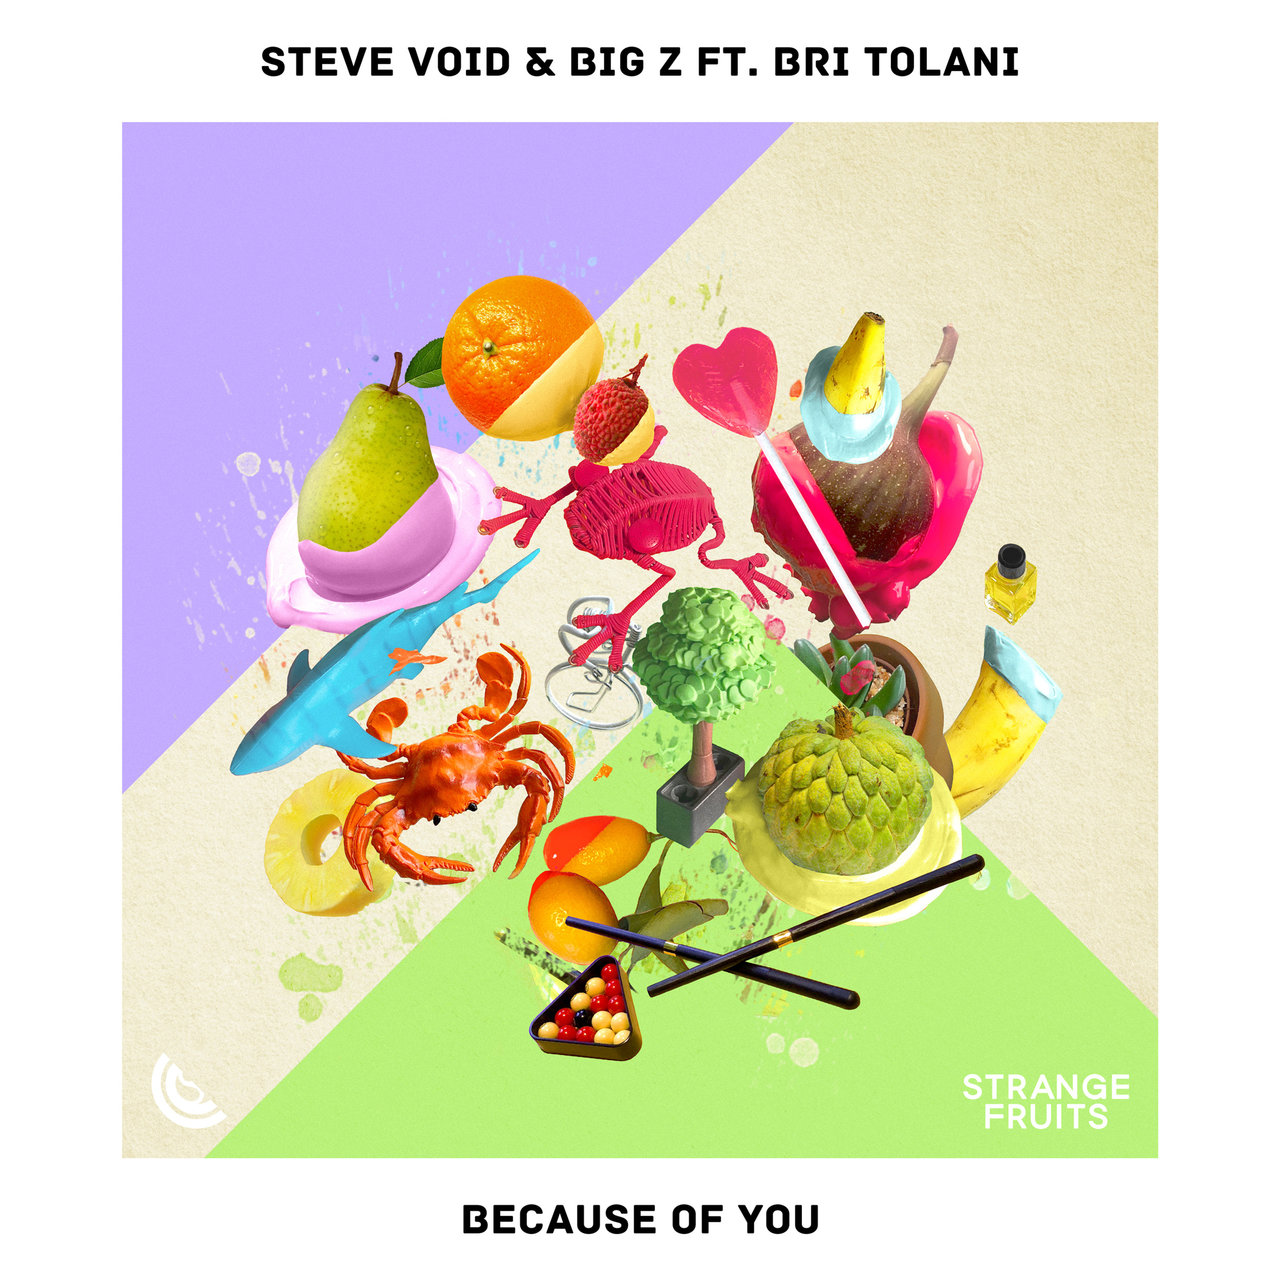 Steve Void & Big Z ft. featuring Bri Tolani Because Of You cover artwork